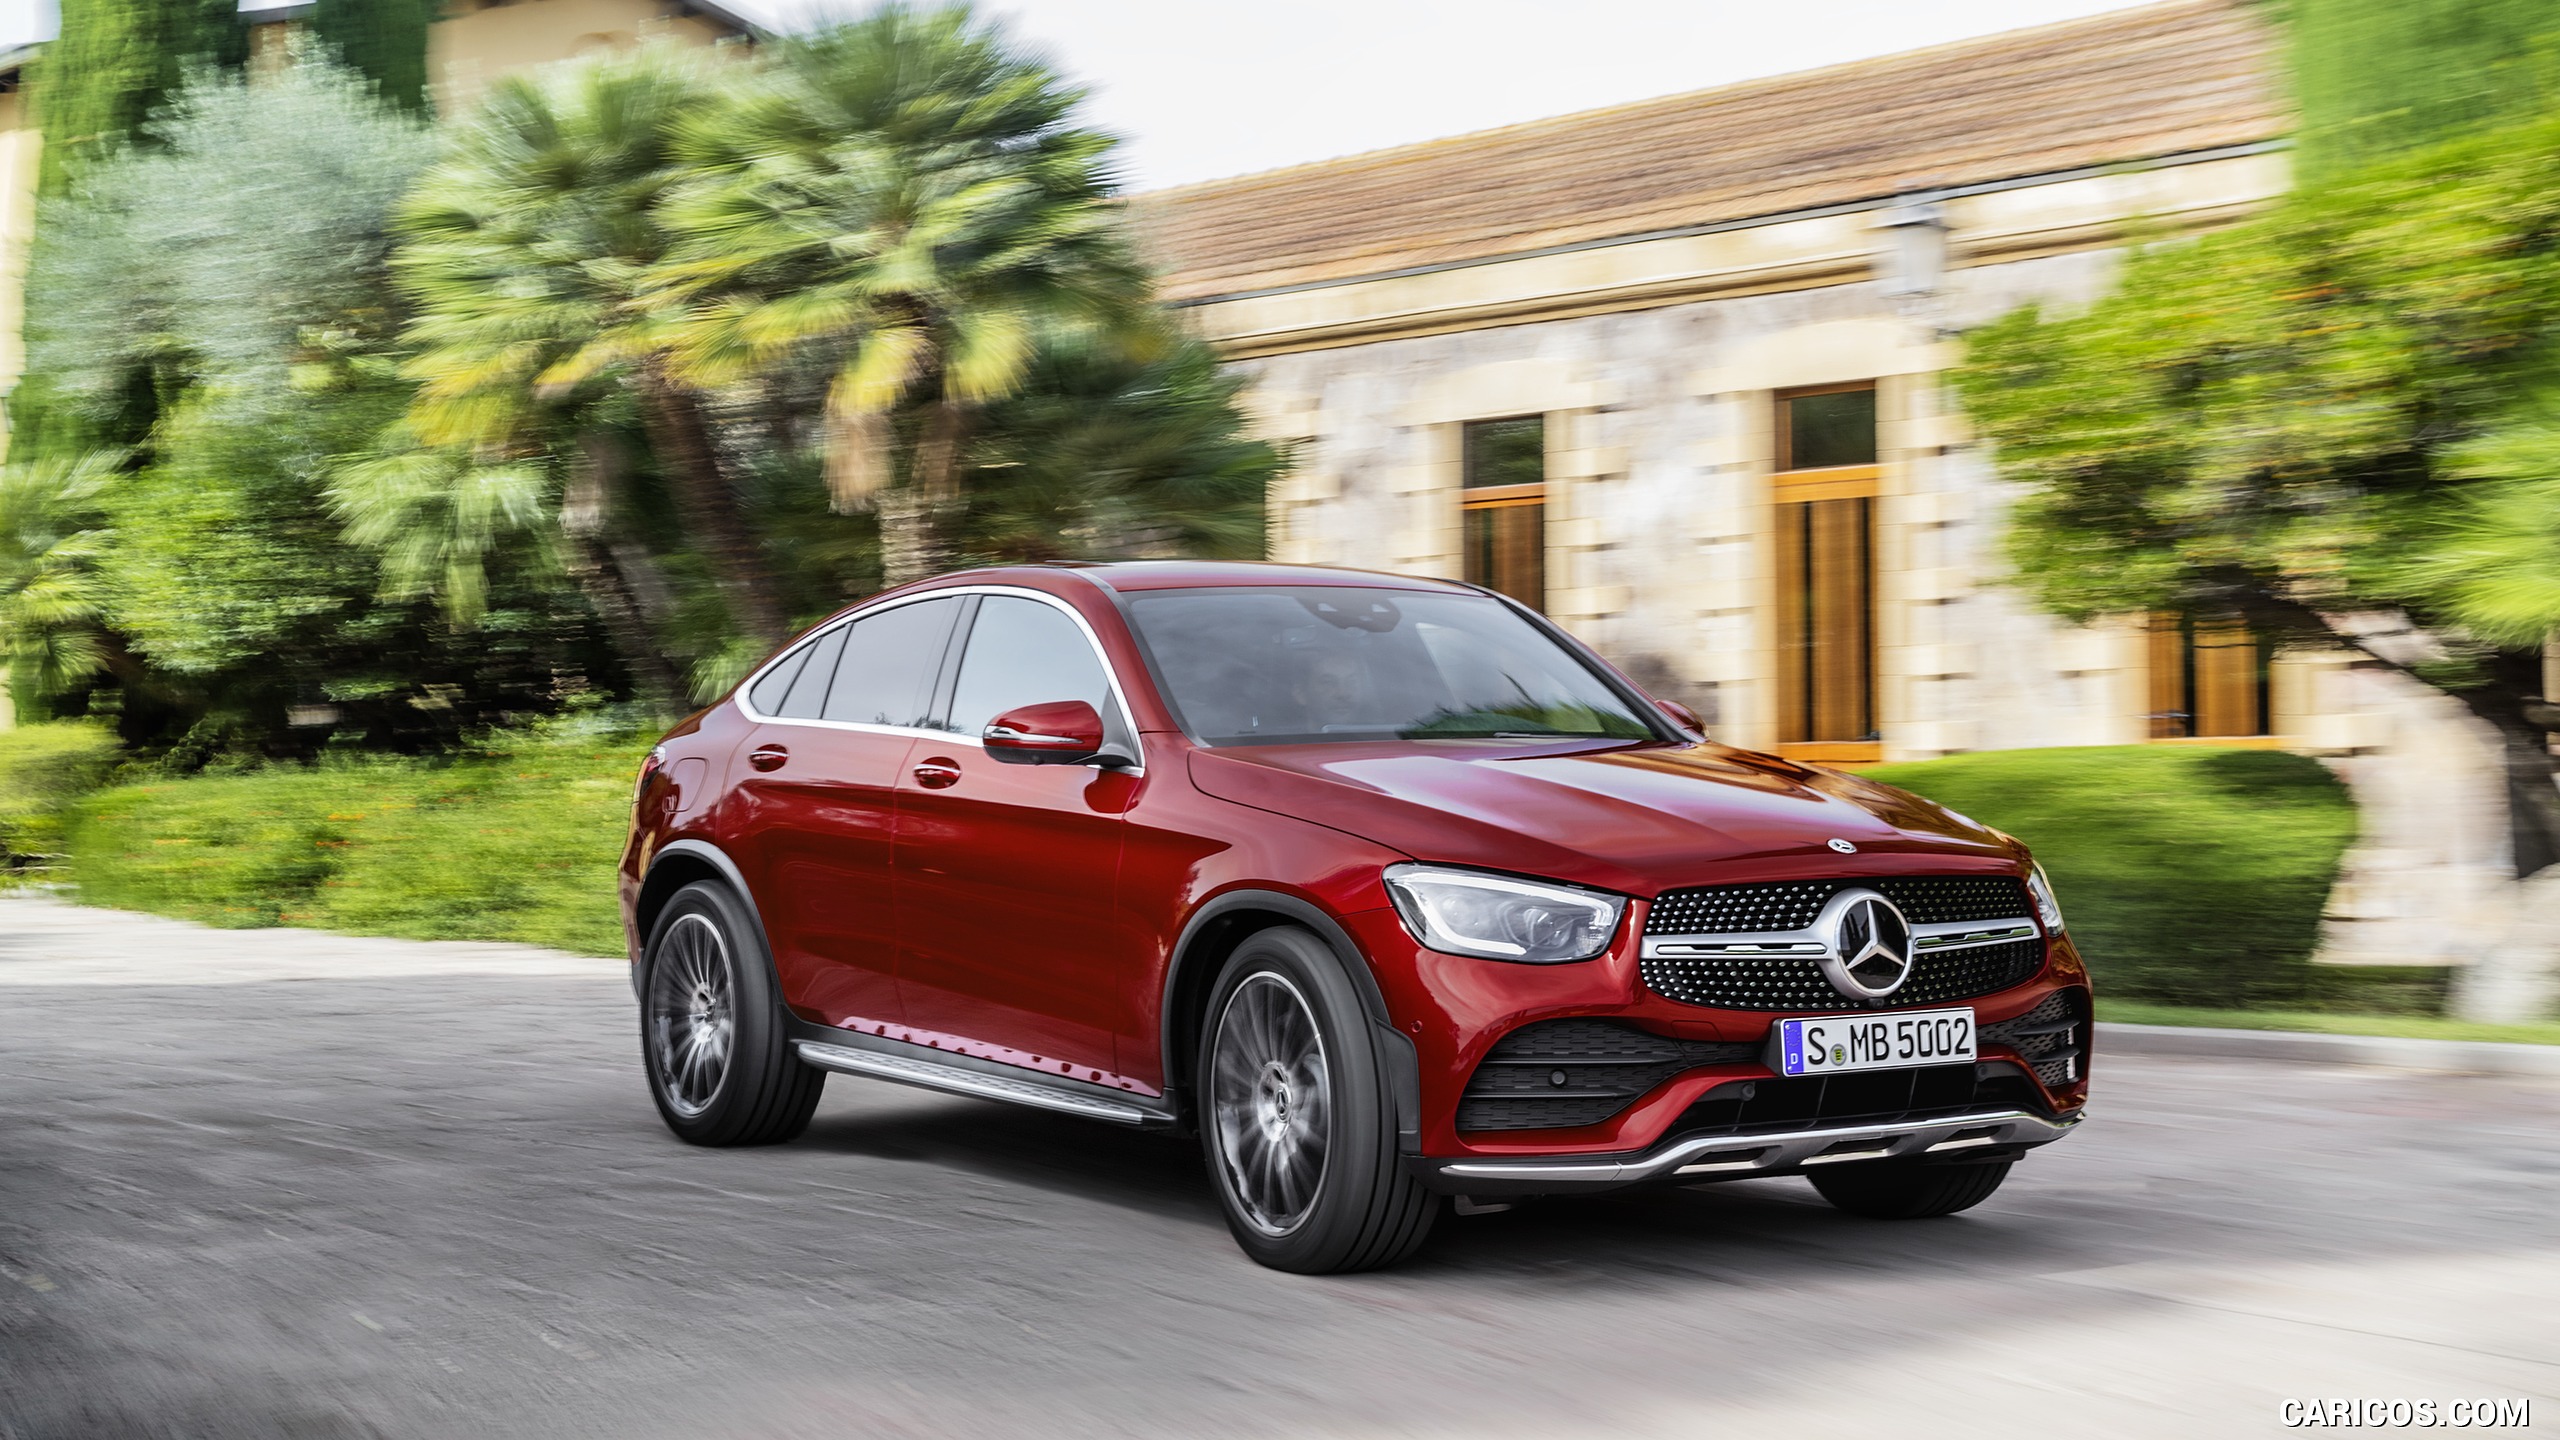 2020 Mercedes-Benz GLC 300 Coupe 4MATIC (Color: Designo Hyacinth Red Metallic) - Front Three-Quarter, #13 of 165